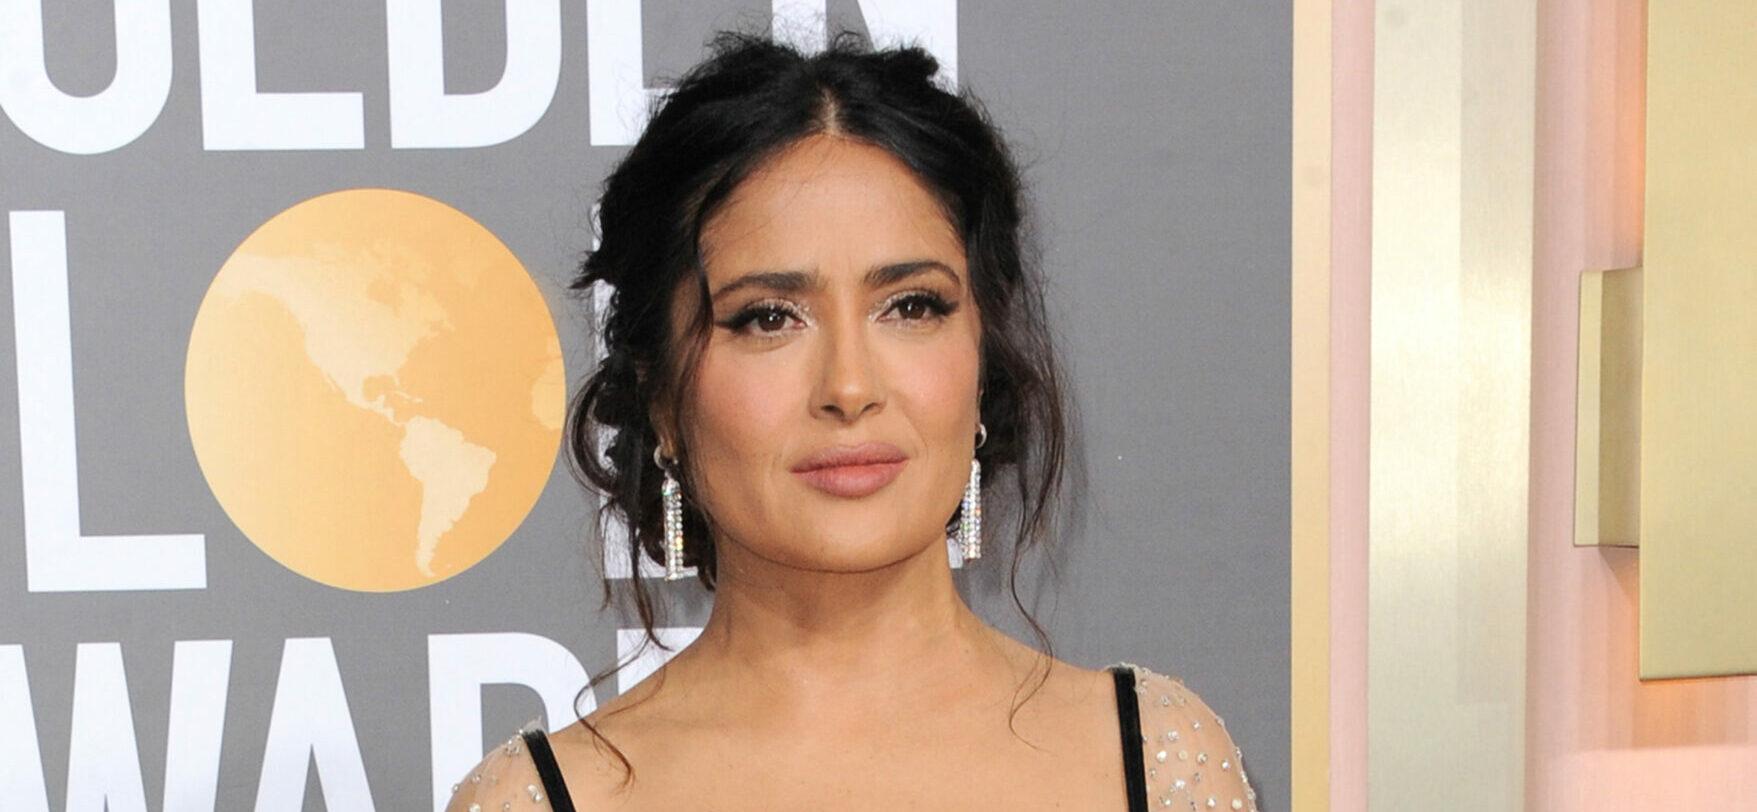 Salma Hayek Leaves Little To The Imagination In See-Through Sheer Dress